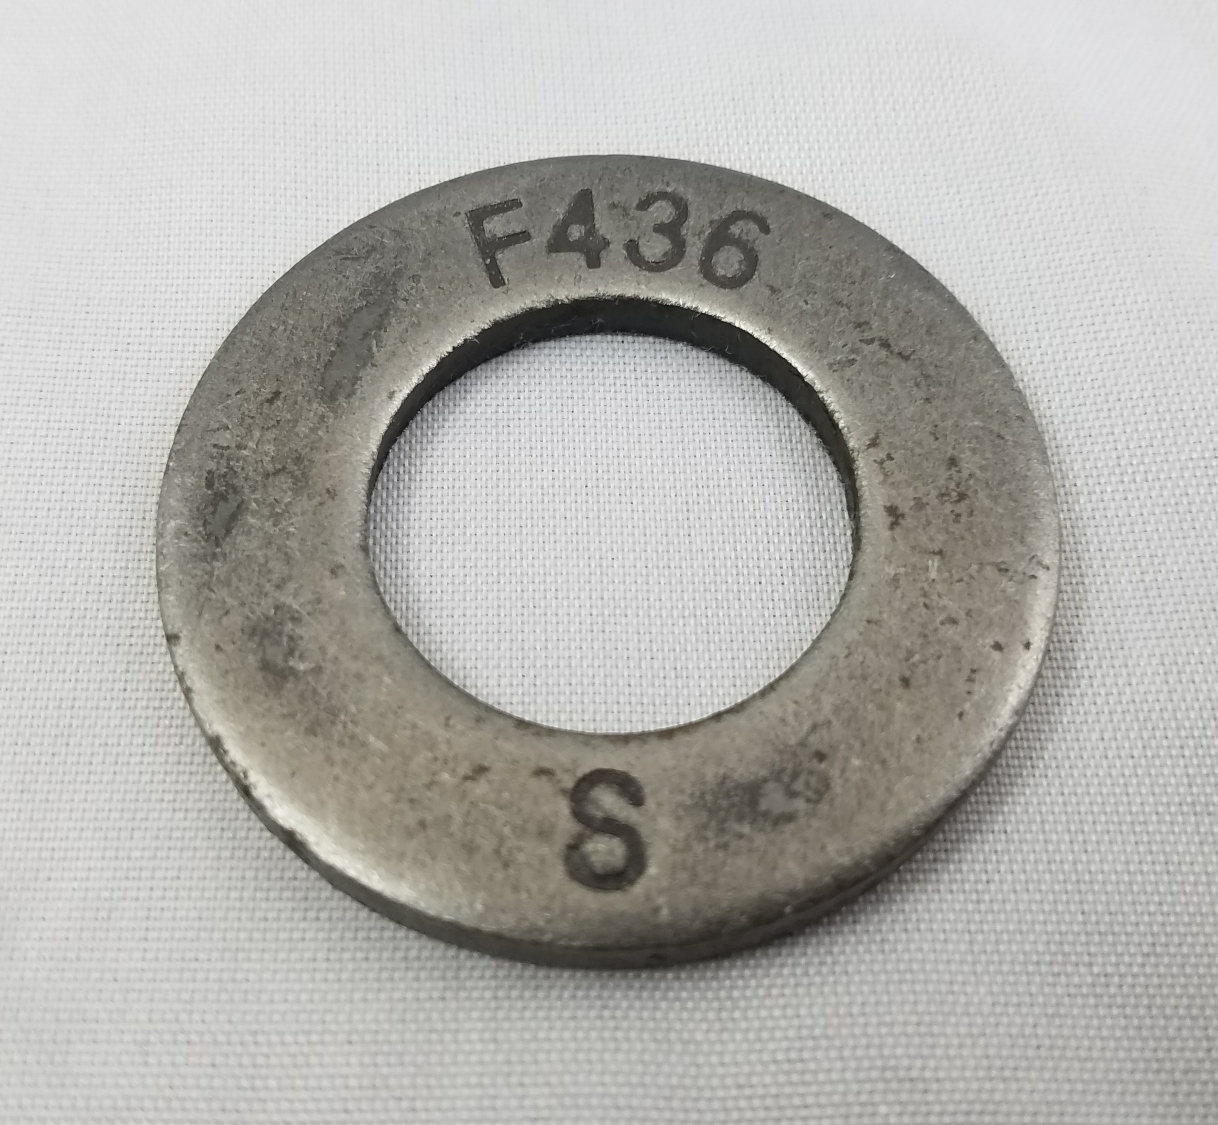 10 Plain 1"x2" Structural Flat Washers 